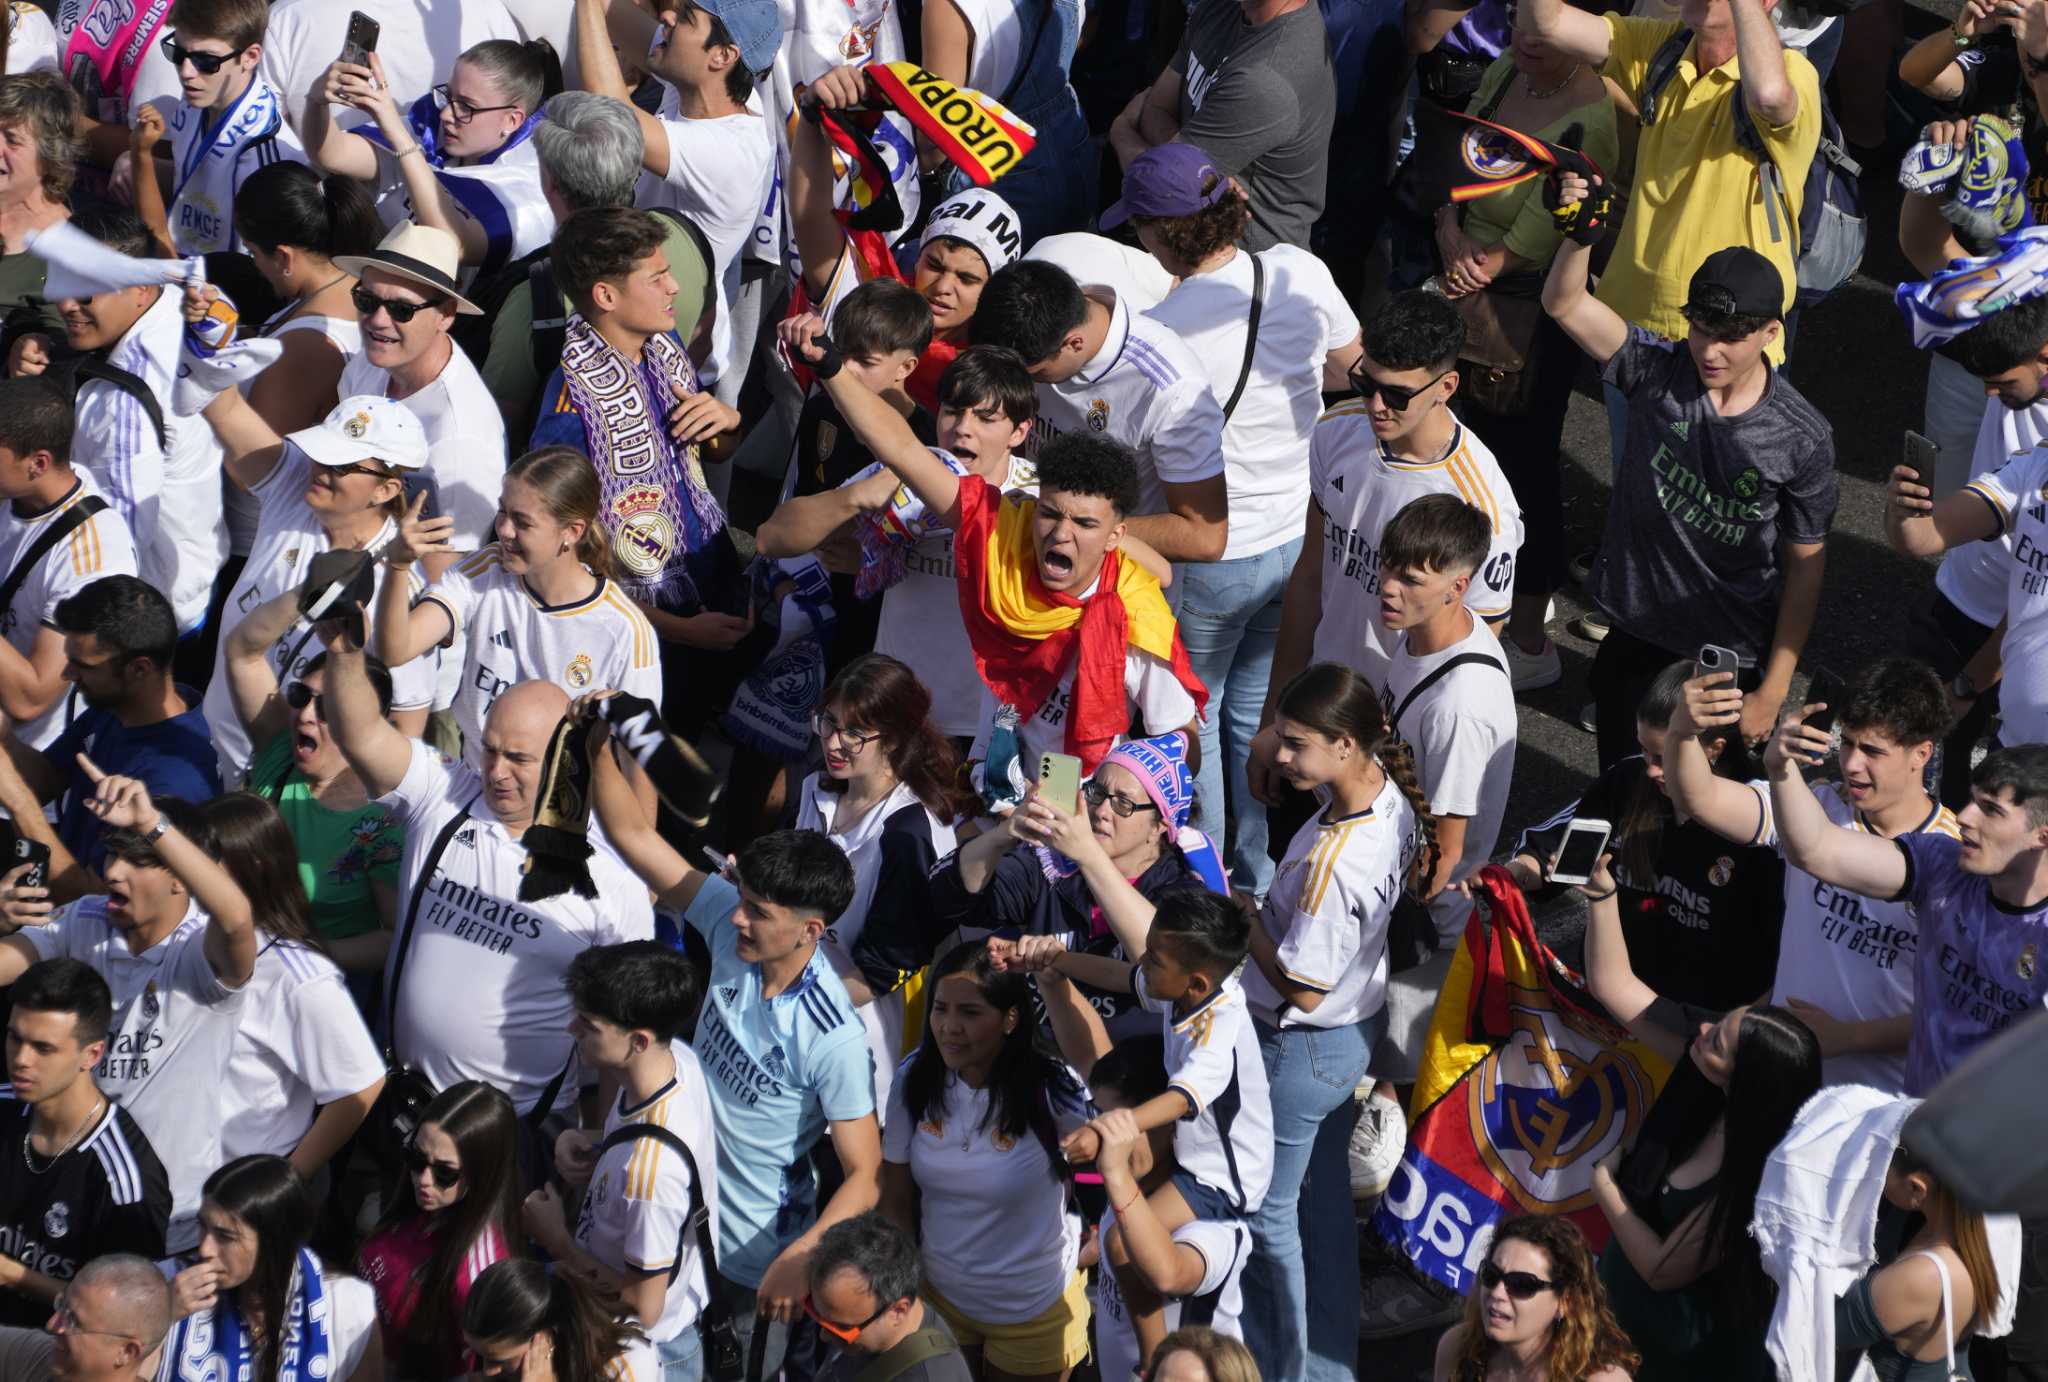 Real Madrid celebrates Spanish league title with fans after reaching Champions League final